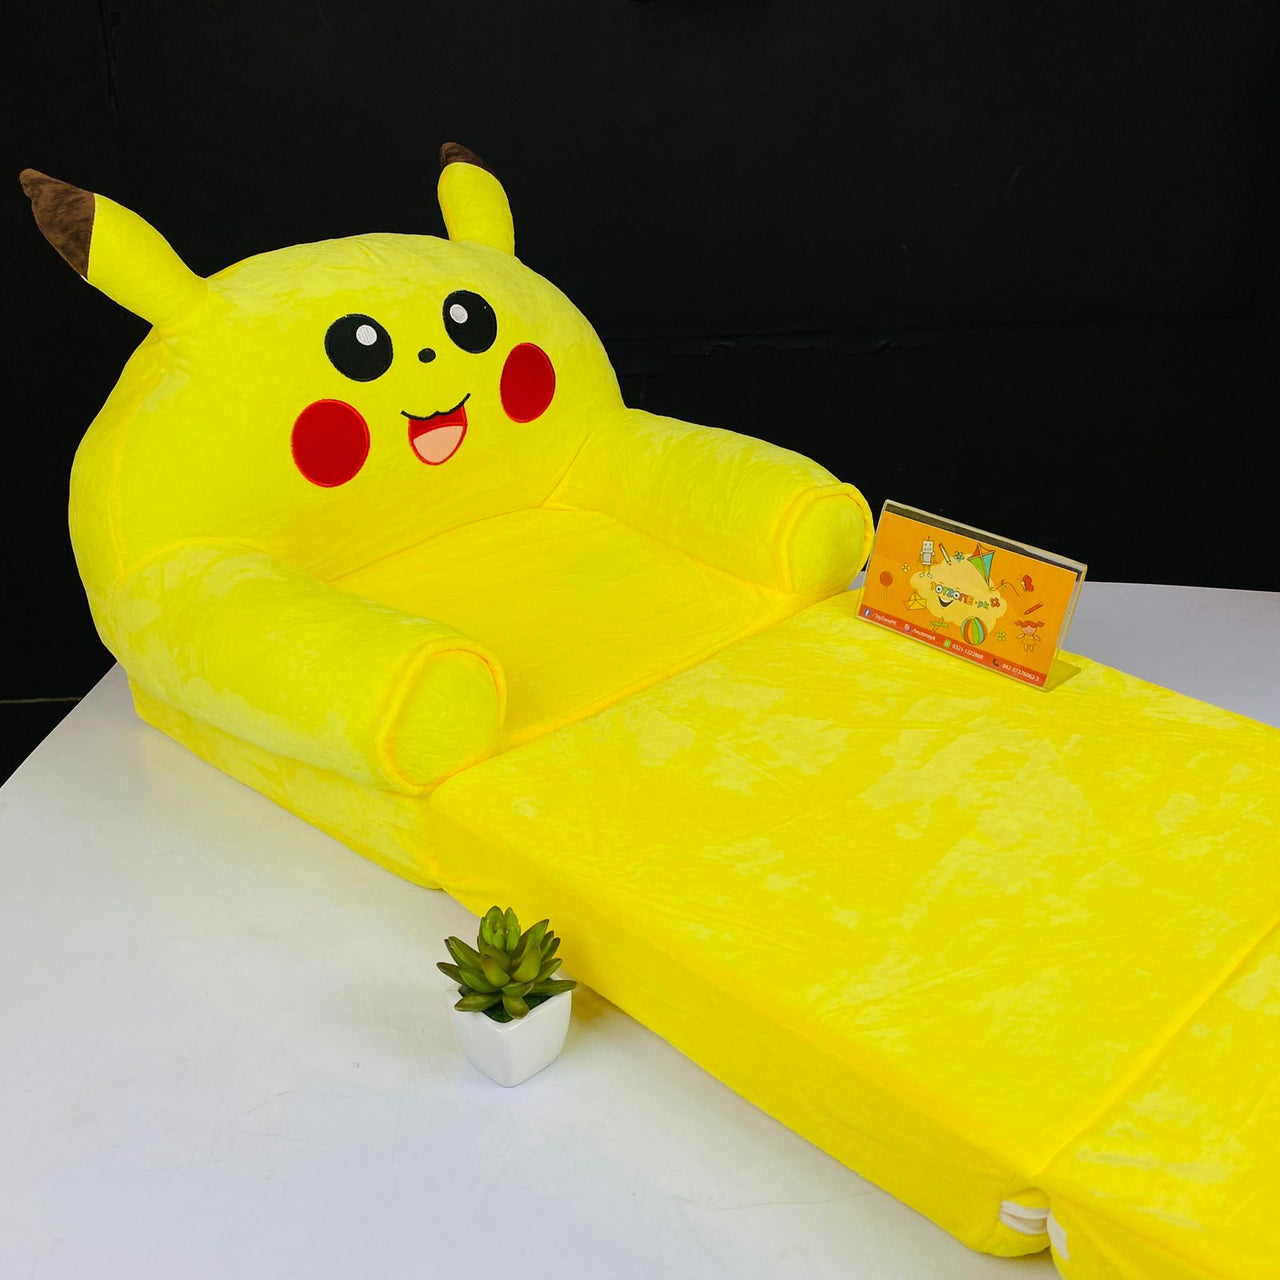 Sofa Seat For Baby In Pikachu Character